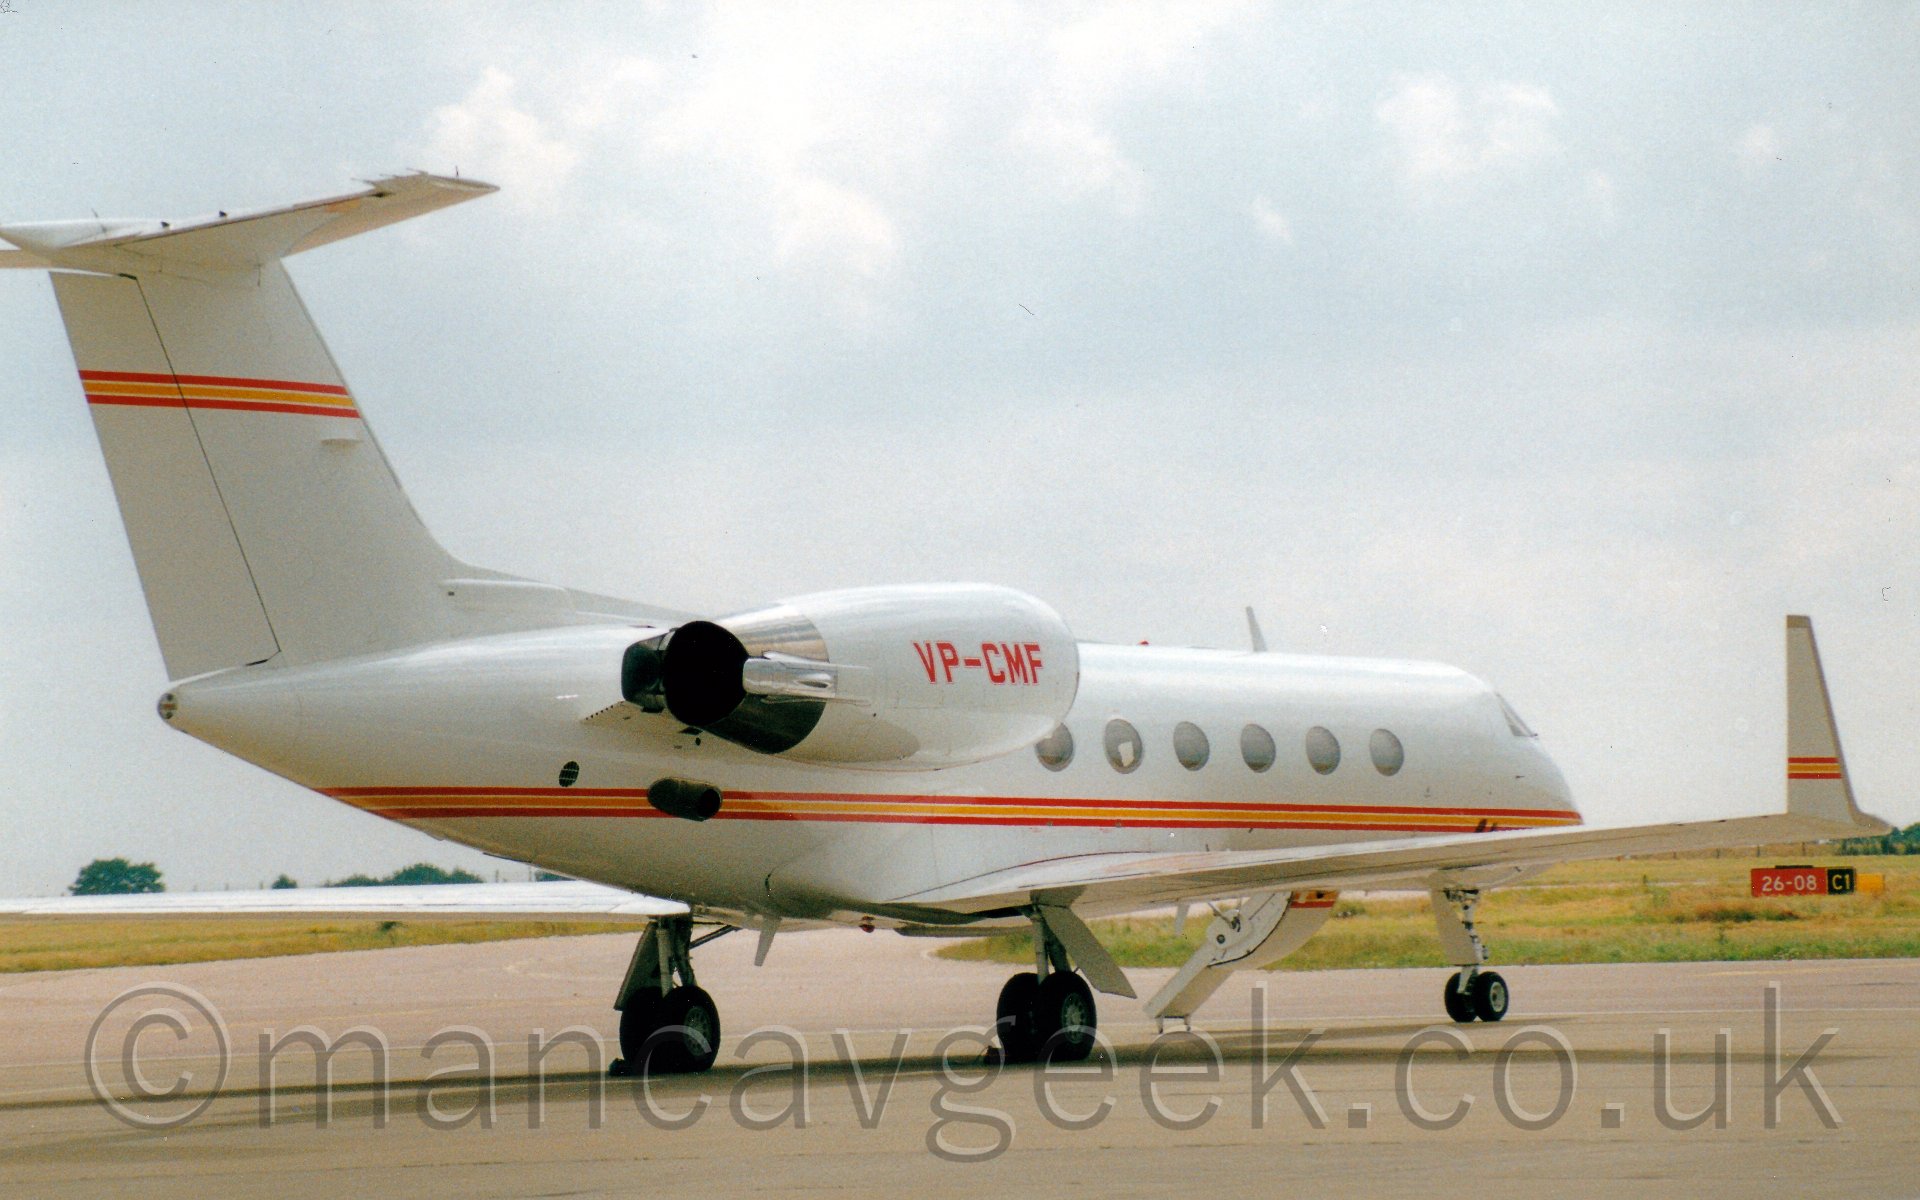 Rear side view of a twin engined bizjet parked facing to the right and away from the camera. The plane is mostly white, with a red and orange stripe running along the body, as well as along the tail and the upturned wingtips. The registration "VP-CMF" is on the engine pods in red. There is a door open on thefar side of the plane, visible under the fuselage, with it's built-inairstairs extended. In the background, grass leads off to trees on the horizon, under a bright white sky.